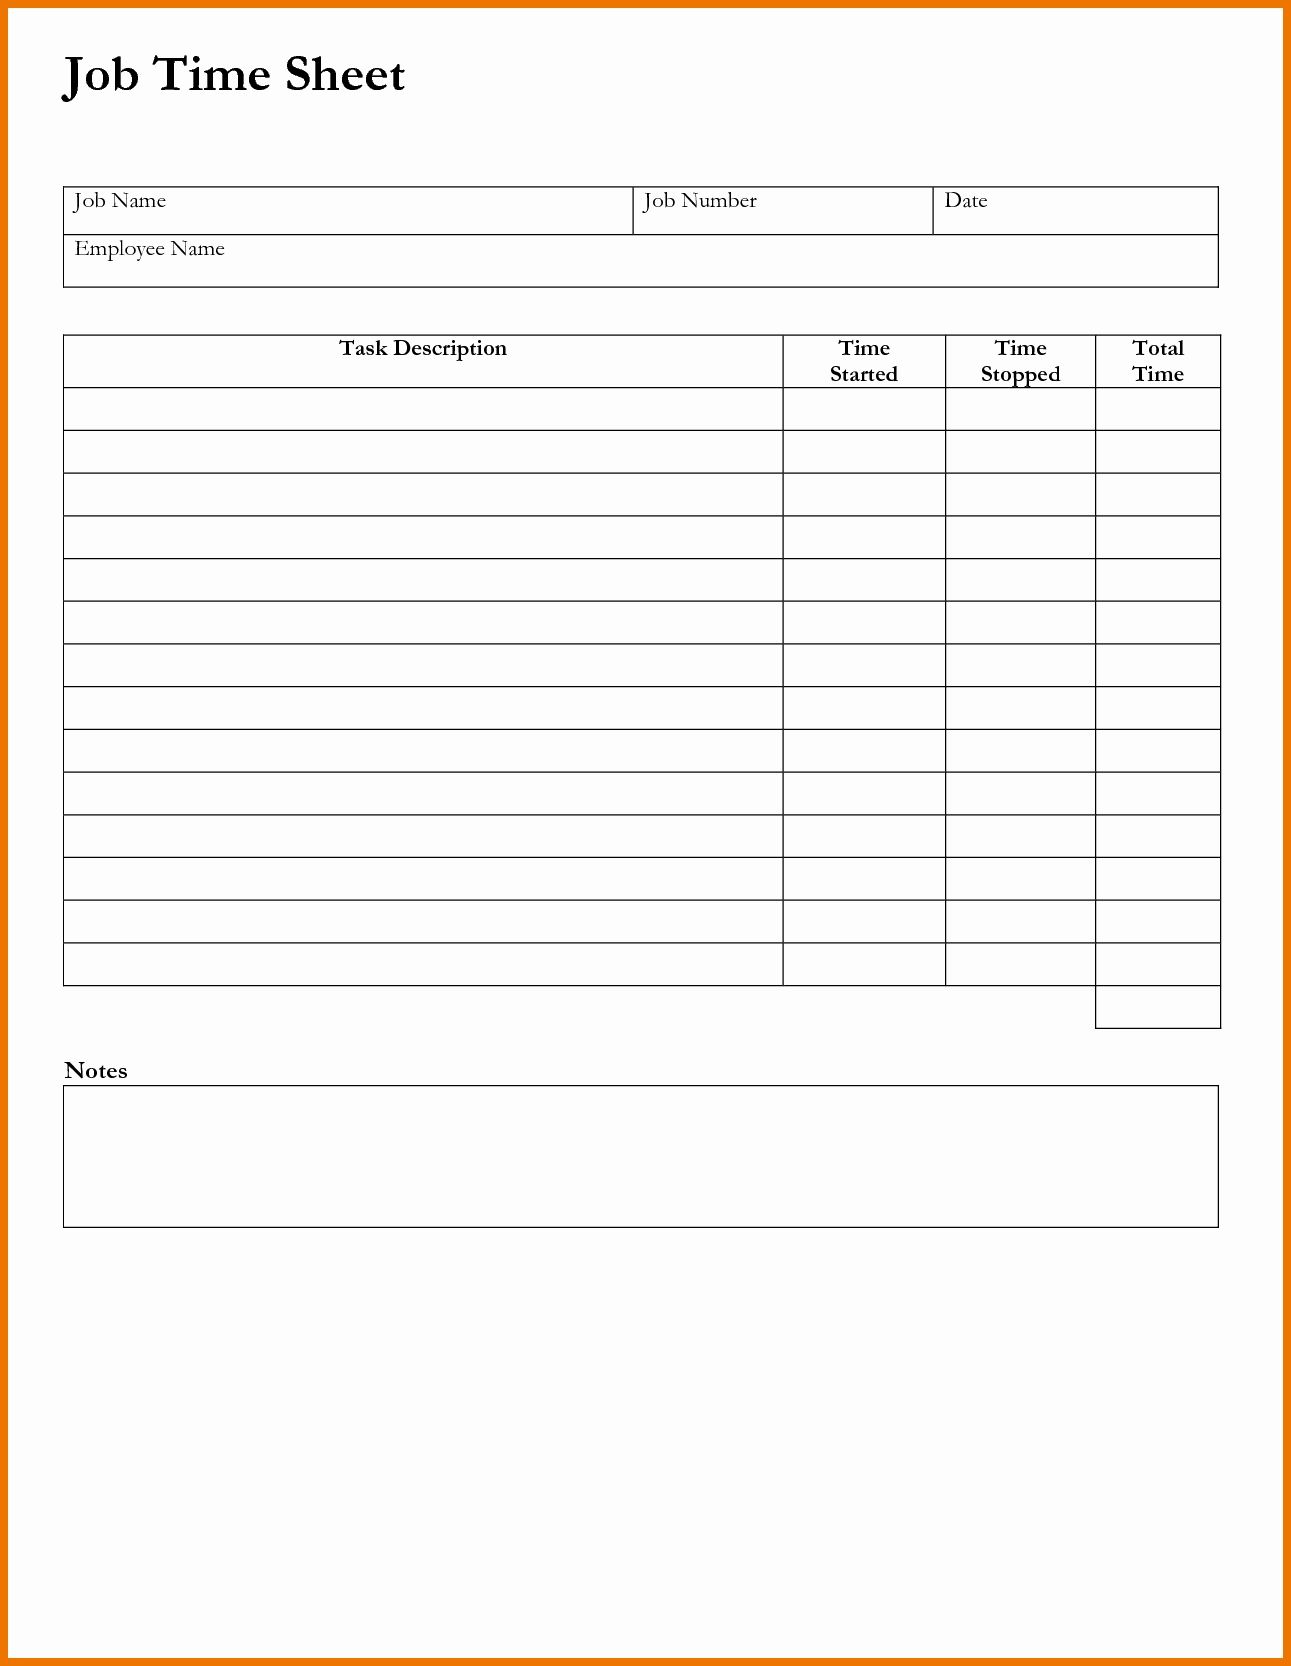 Letters Of Excel Timesheet Template With Tasks In Excel Timesheet Template With Tasks Sheet